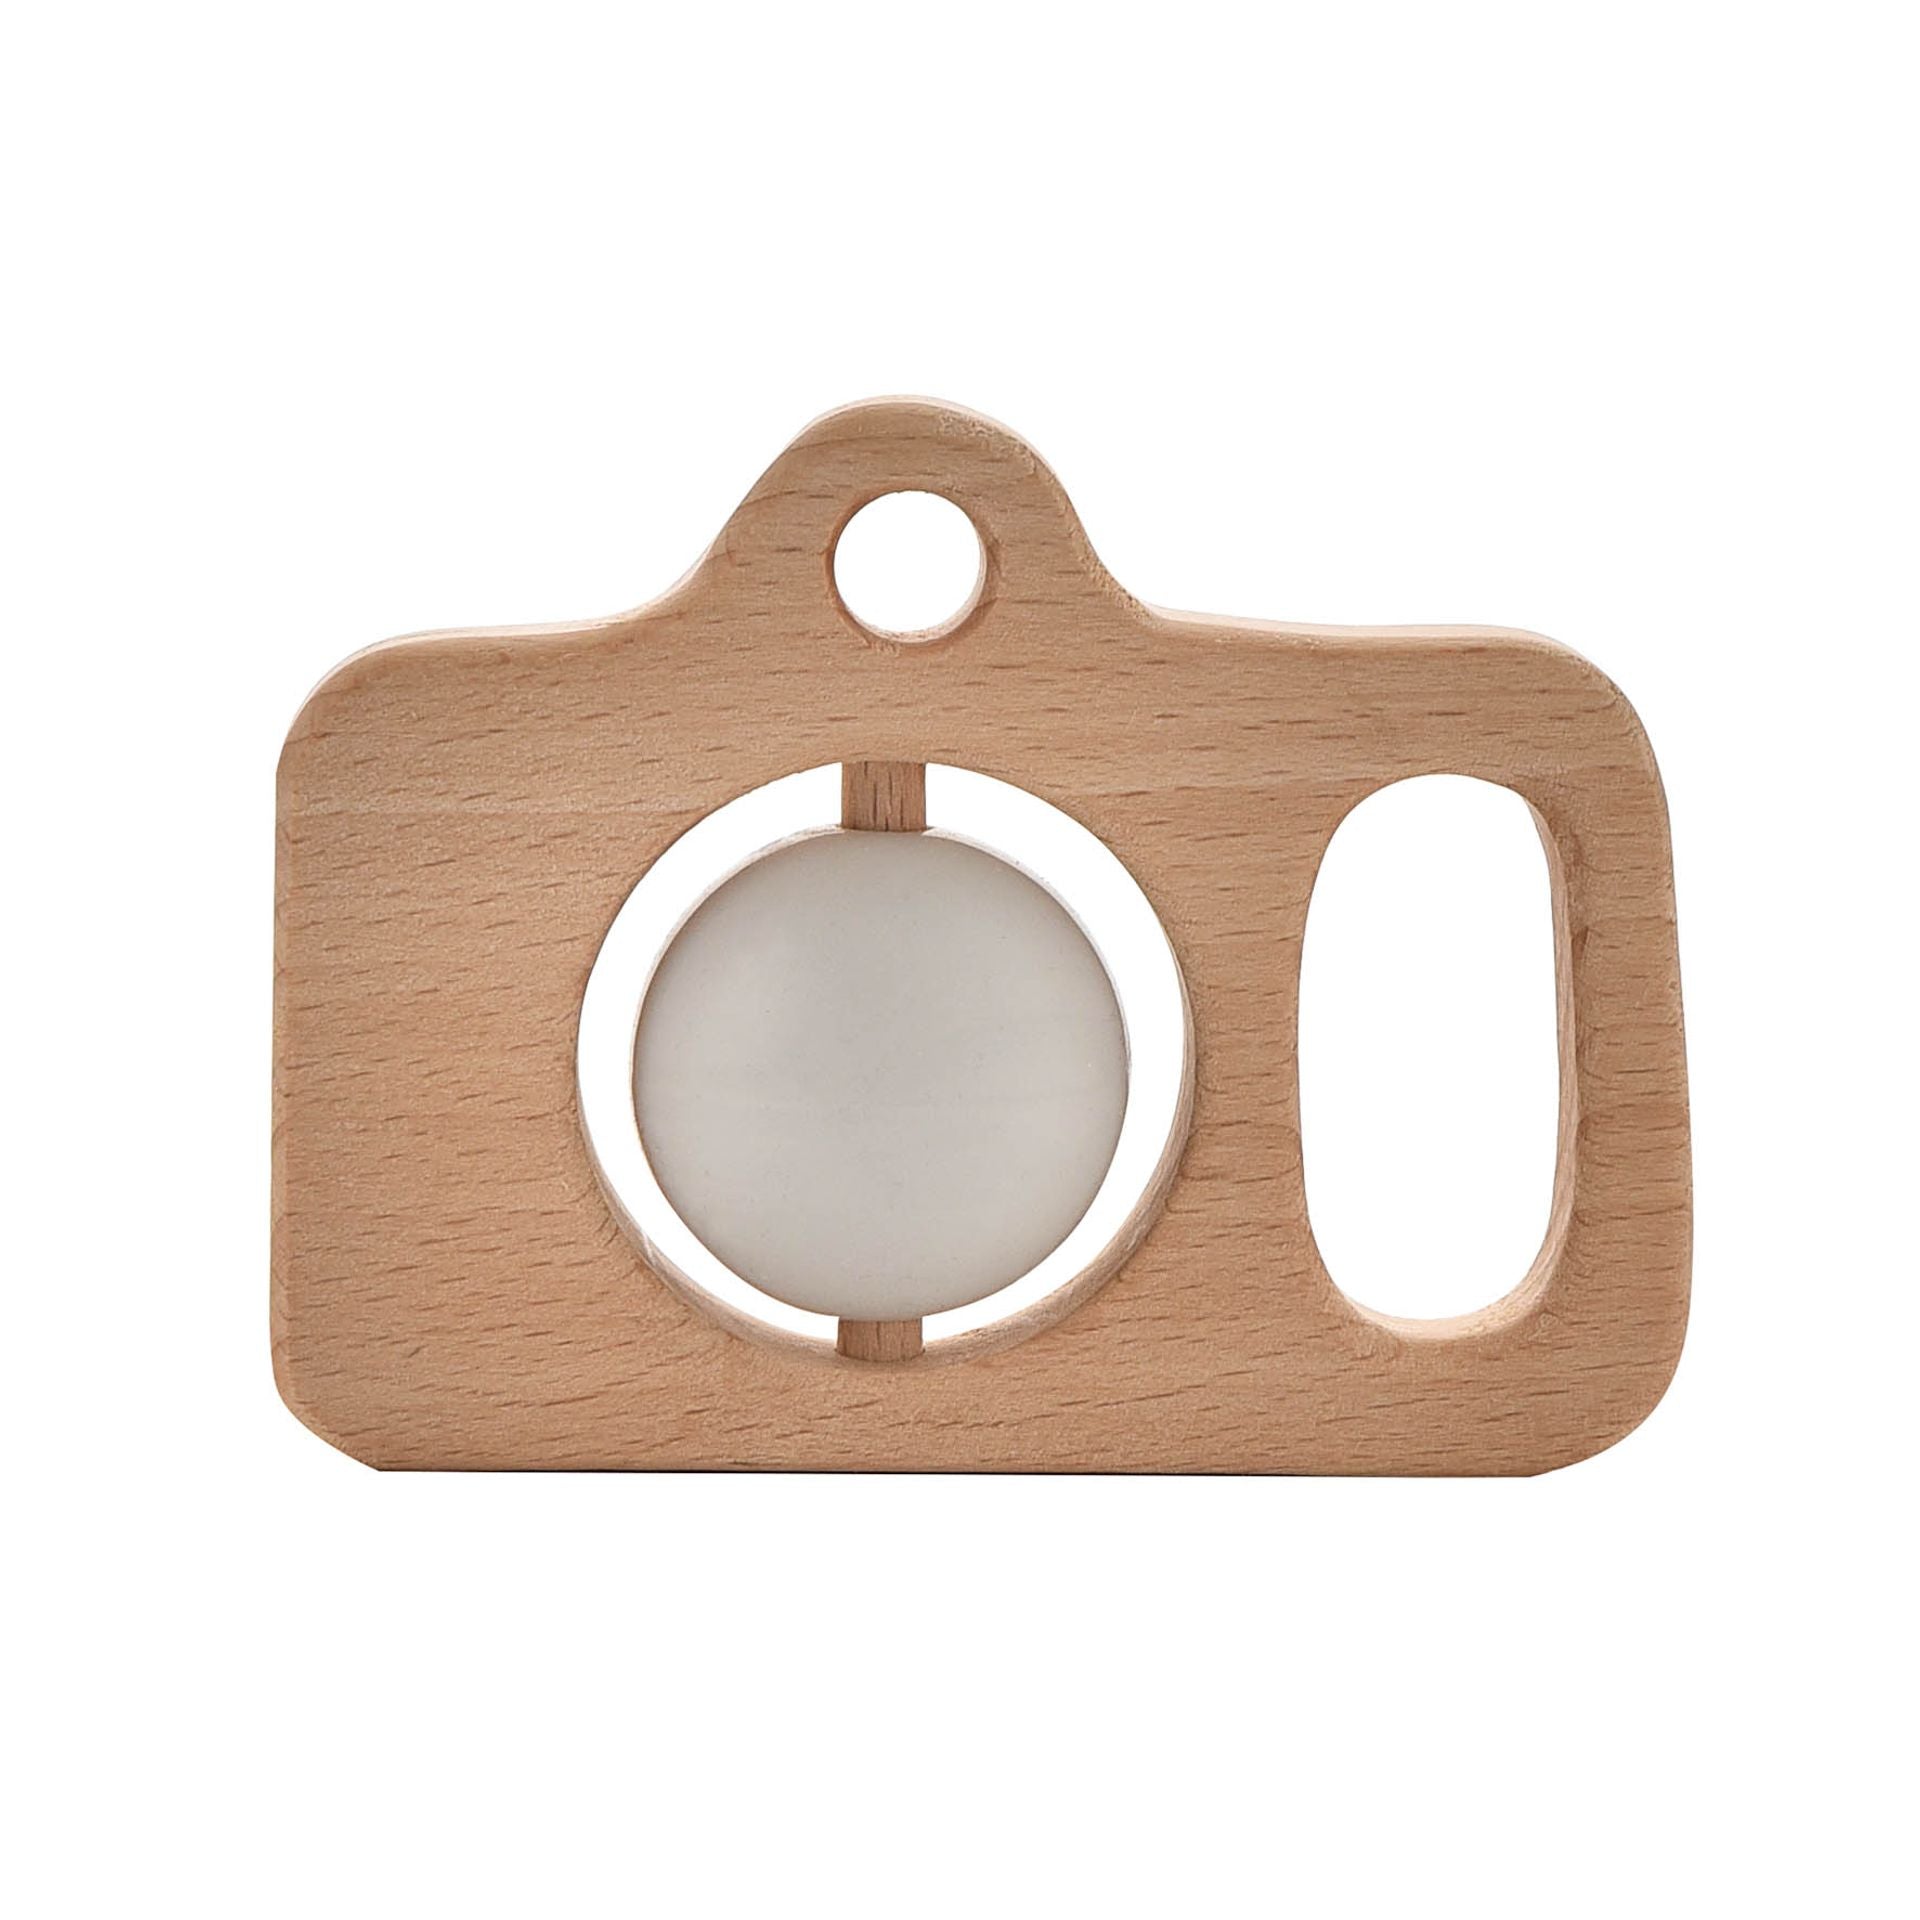 Bambino Wood & Silicone Camera Teether - Neutral